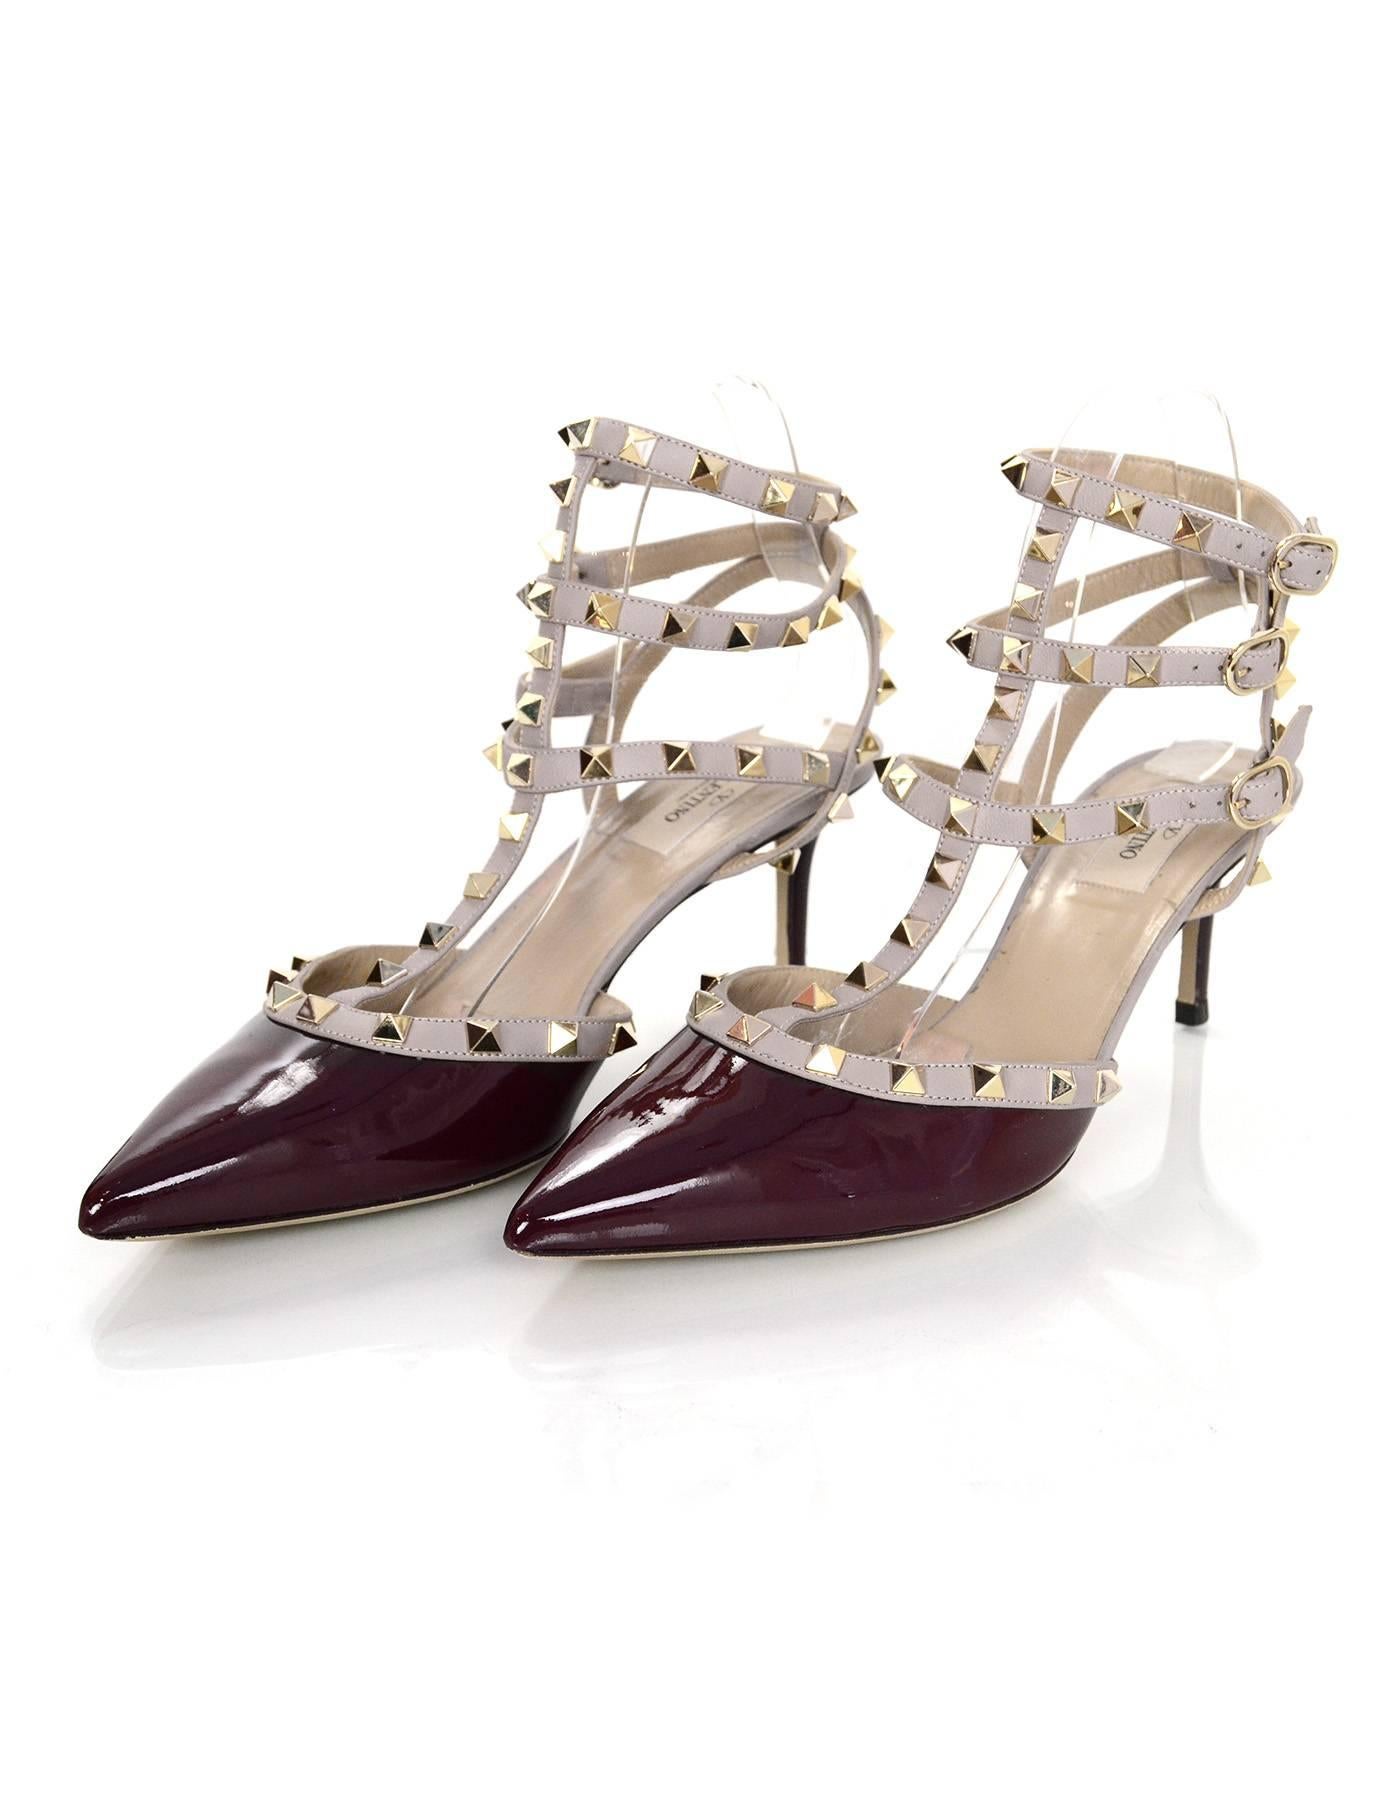 Valentino Burgundy Patent Rockstud Pumps Sz 40
65mm pumps with studding throughout

Made In: Italy
Color: Burgundy
Retail Price: $995 + tax
Materials: Patent leather, leather, metal
Closure/Opening: Buckle closure at ankle
Sole Stamp: Valentino